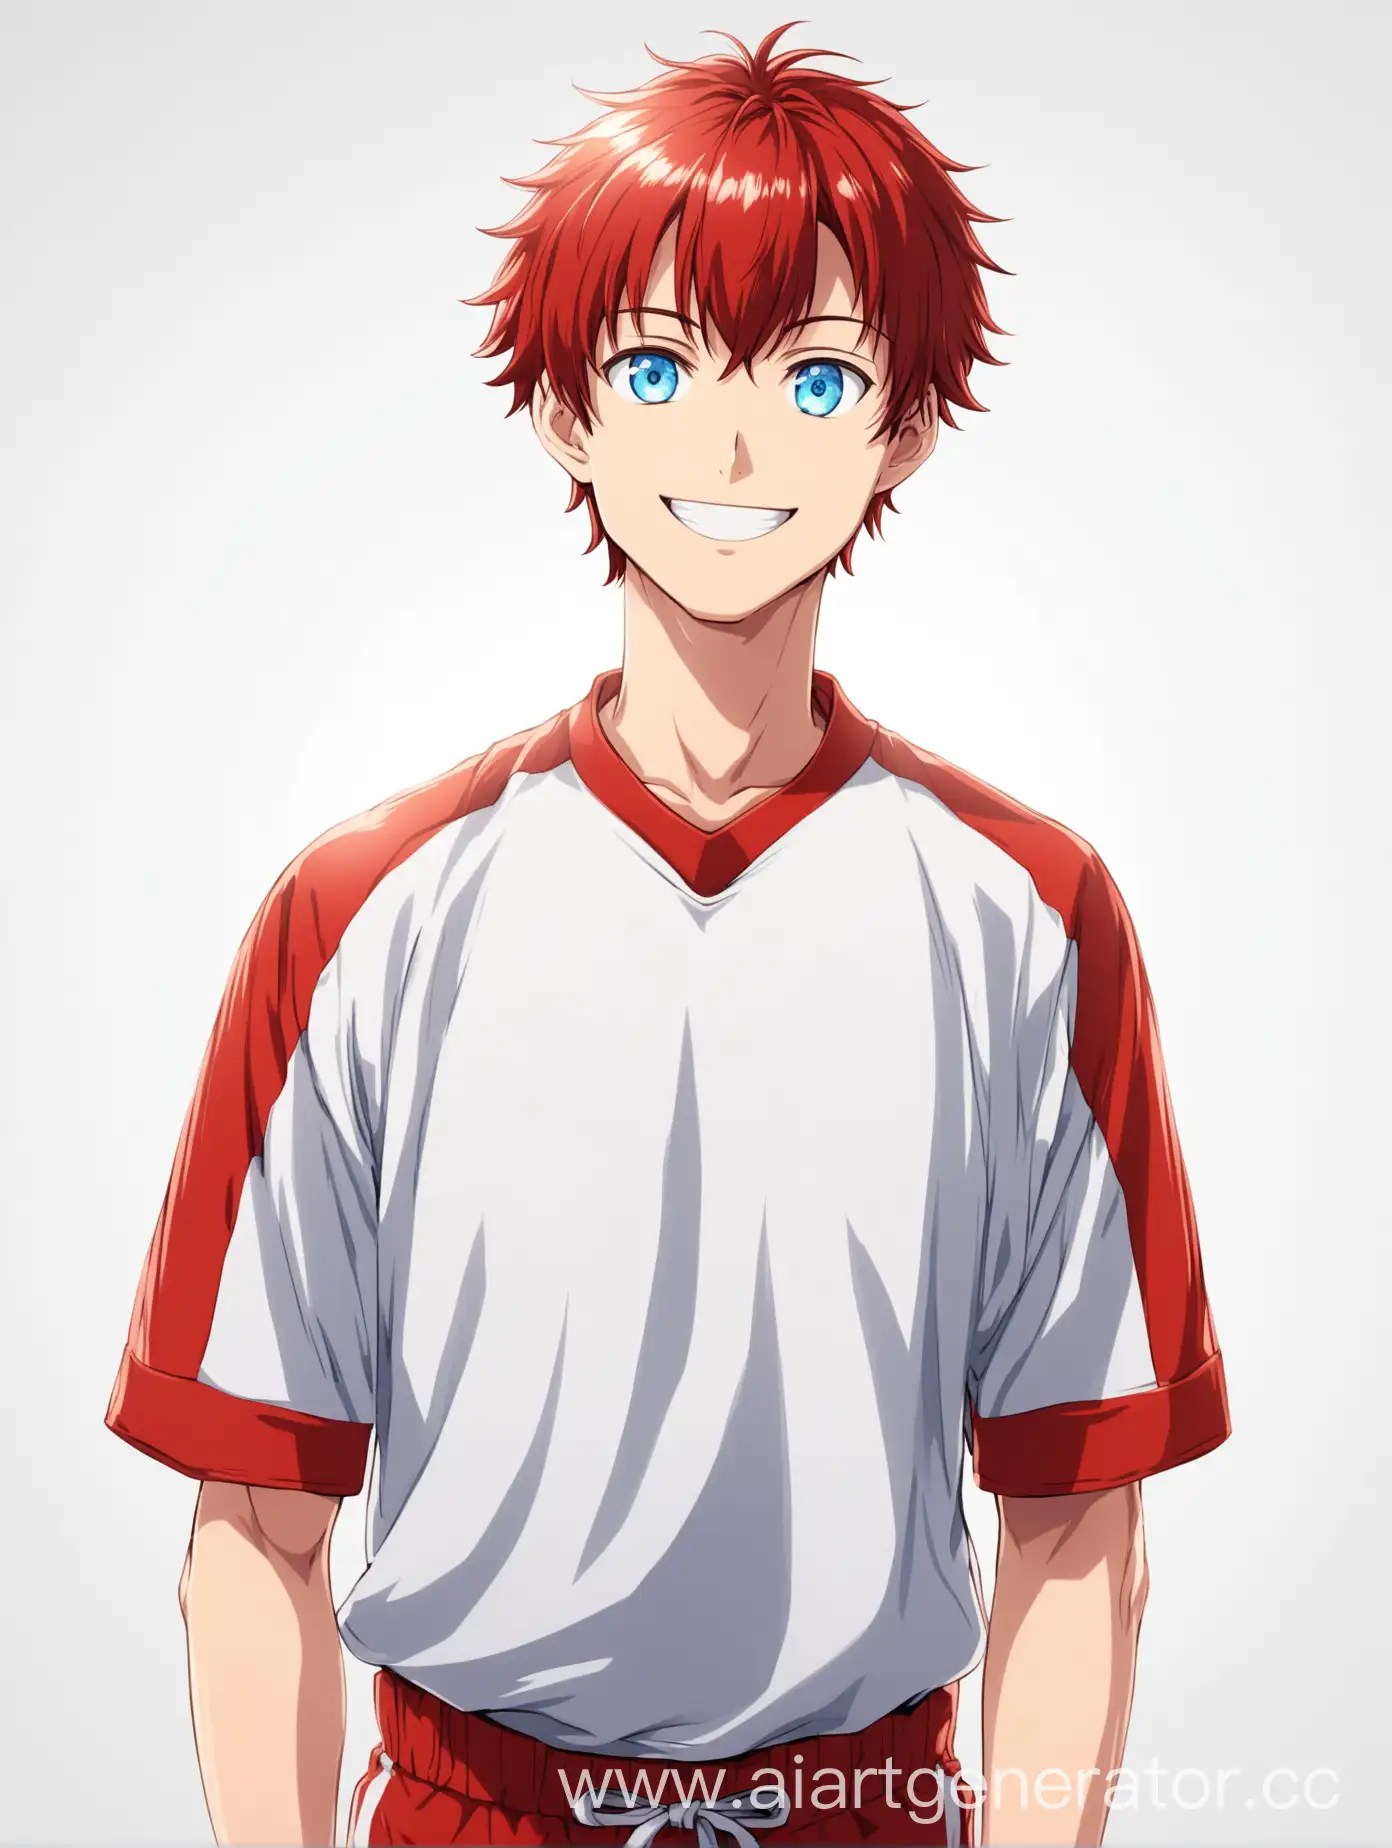 Cheerful-Anime-Athlete-in-Red-Uniform-Smiling